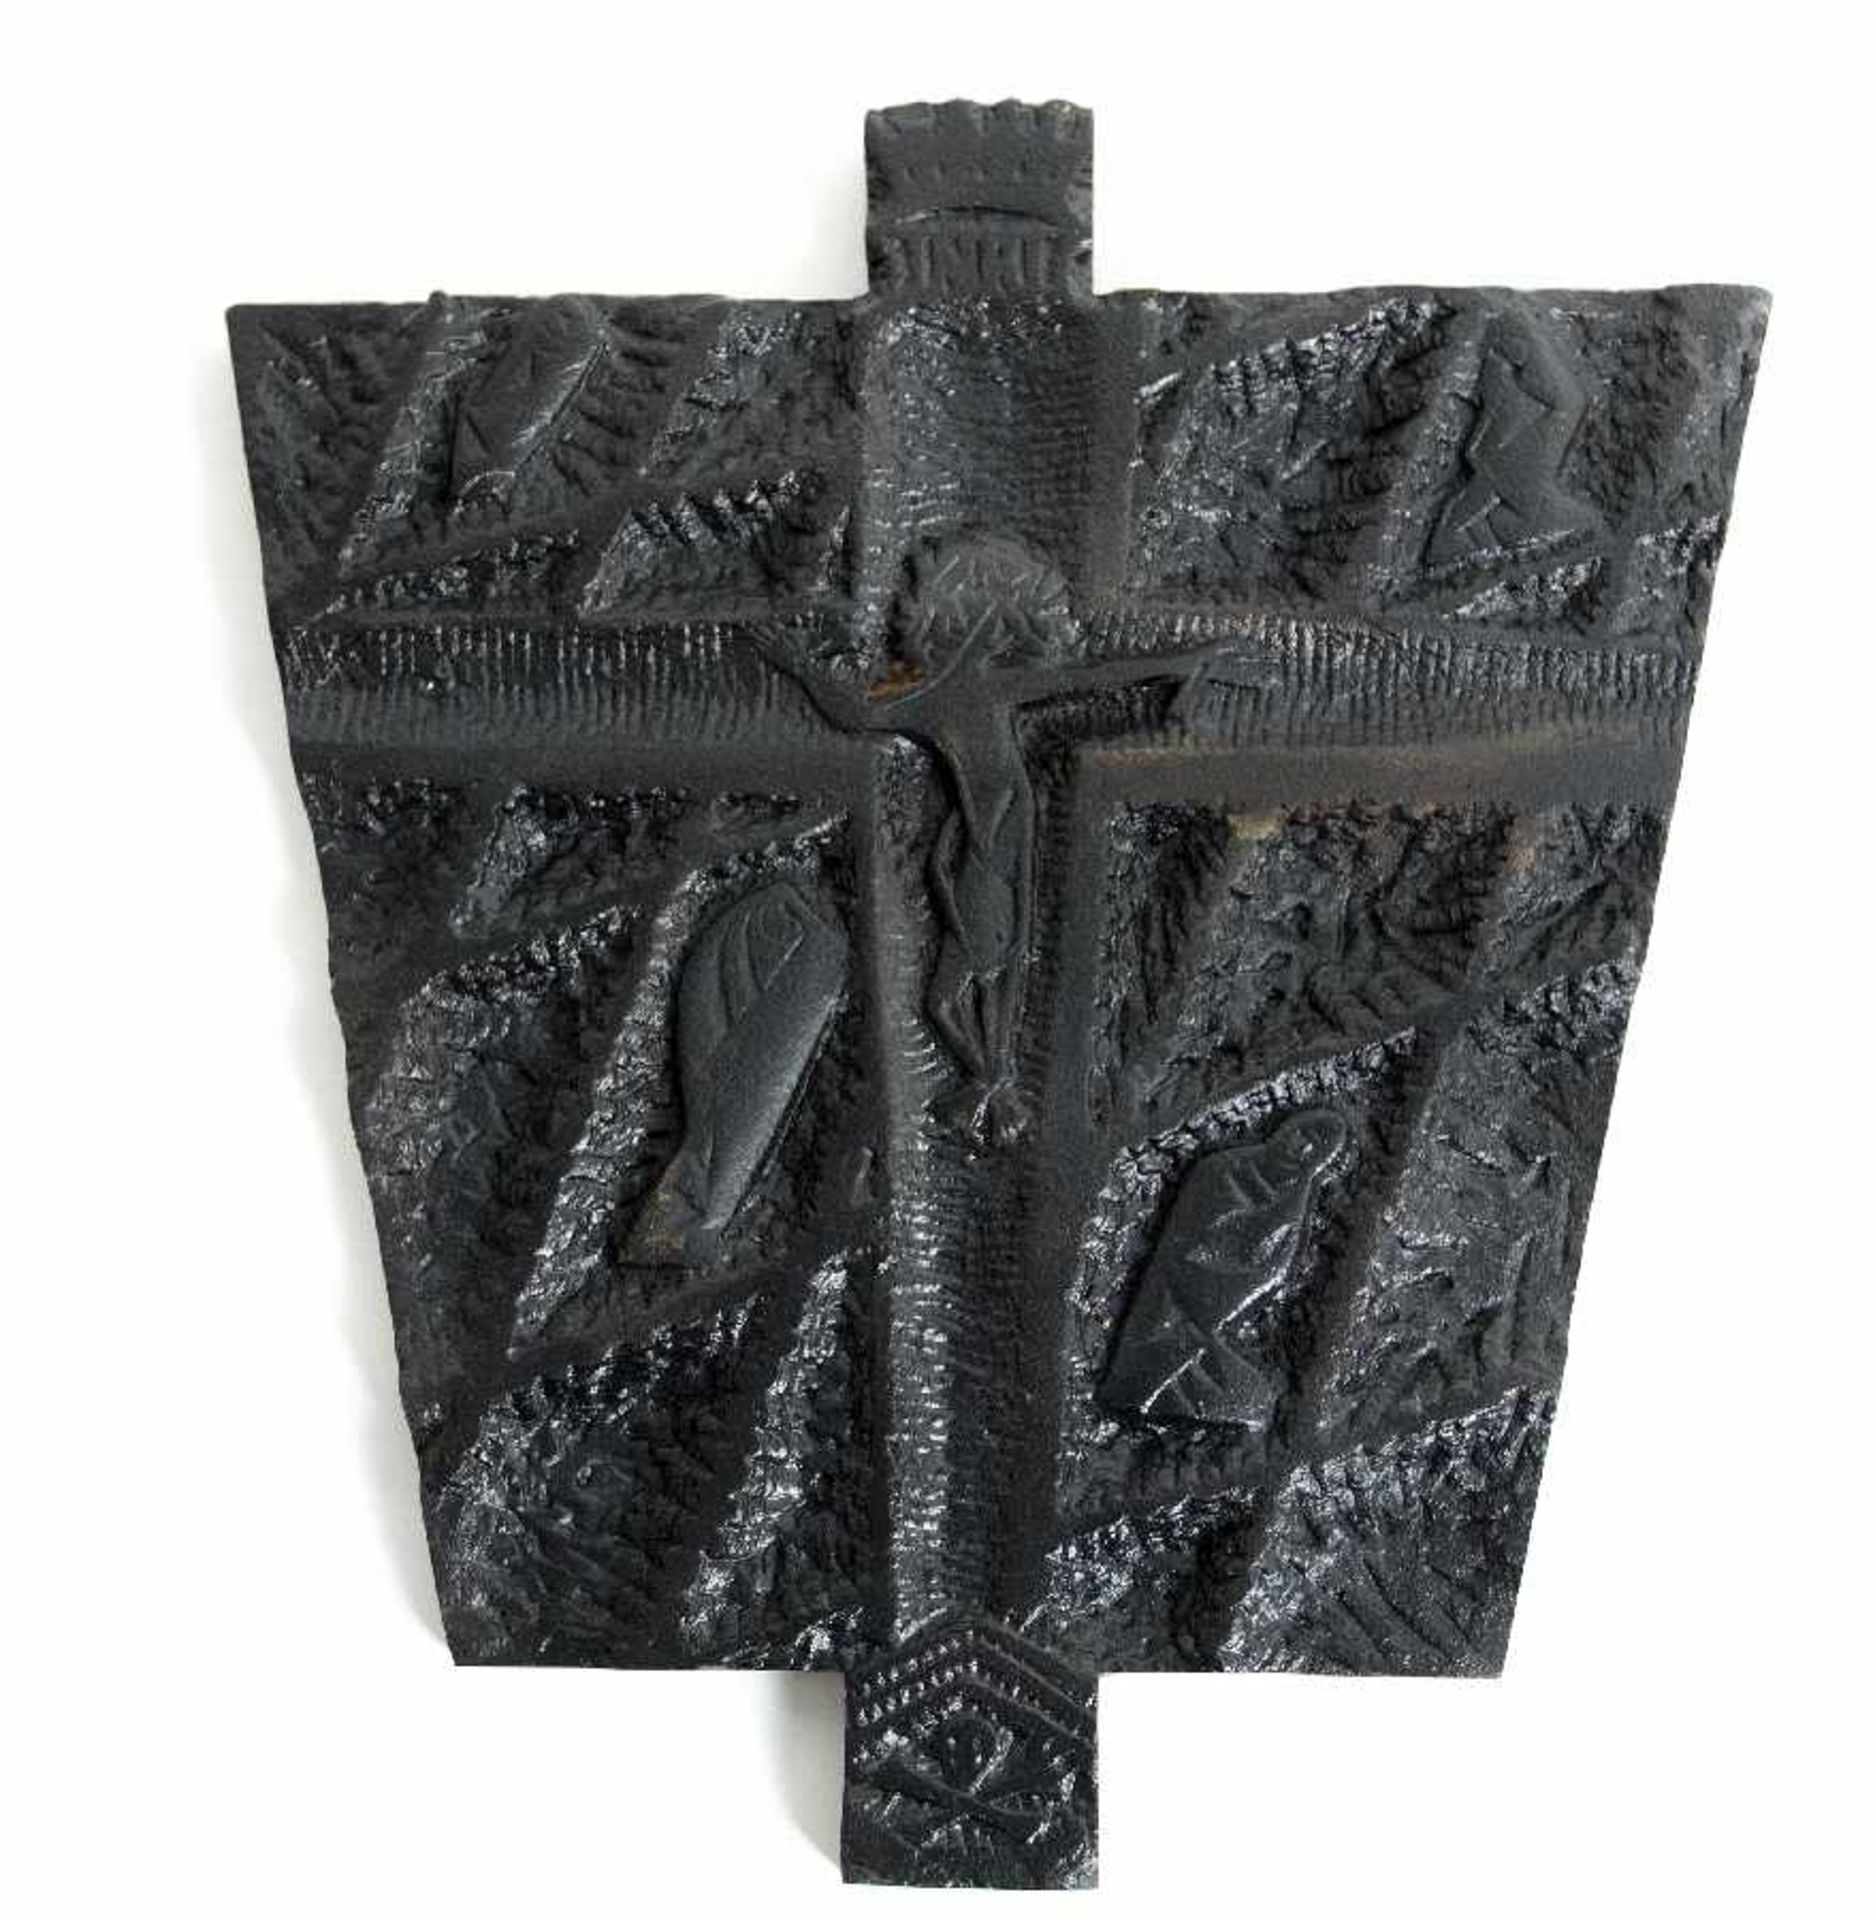 Rhenish Sculptor Mid-20th CenturyJesus on the crossCast iron relief, patinated, early 50s; H 44.5